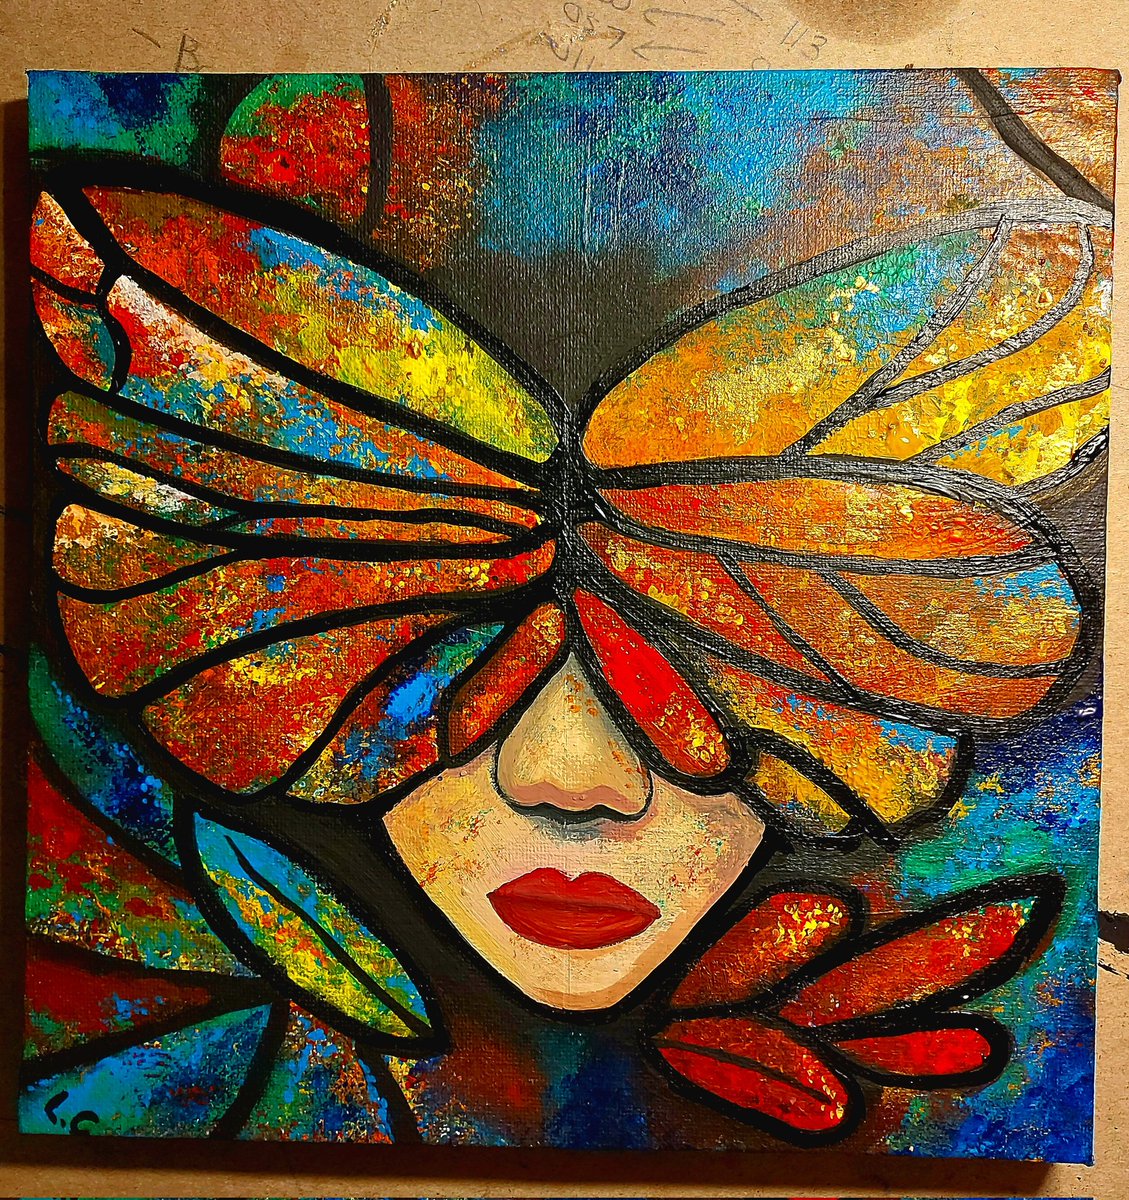 Metamorphosis acrylic painting. It was a pleasure to paint this. 
etsy.com/ca/shop/Lizzyw…
#art #artistic #artist #arte #artsy #arts #painting #paintings #galleryart #onlinegallery #fineart #newartist #artisofinstagram #risingartist #artcollectors #paintingoftheday #onlinegallery